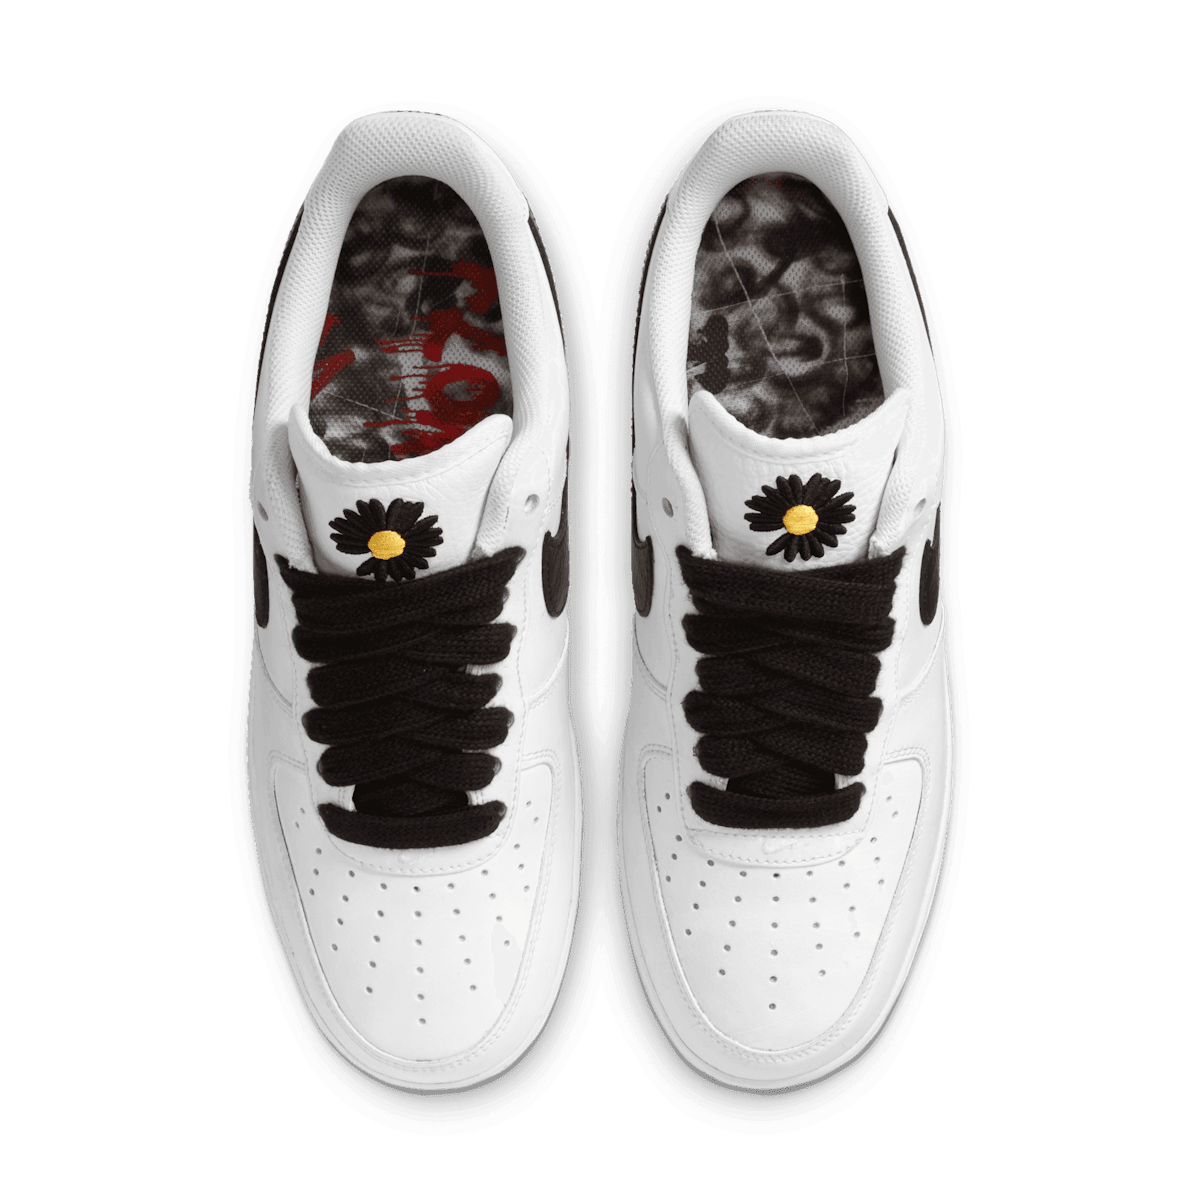 Nike Air Force 1 Low G-Dragon Peaceminusone Para-Noise 2.0 Angle 1